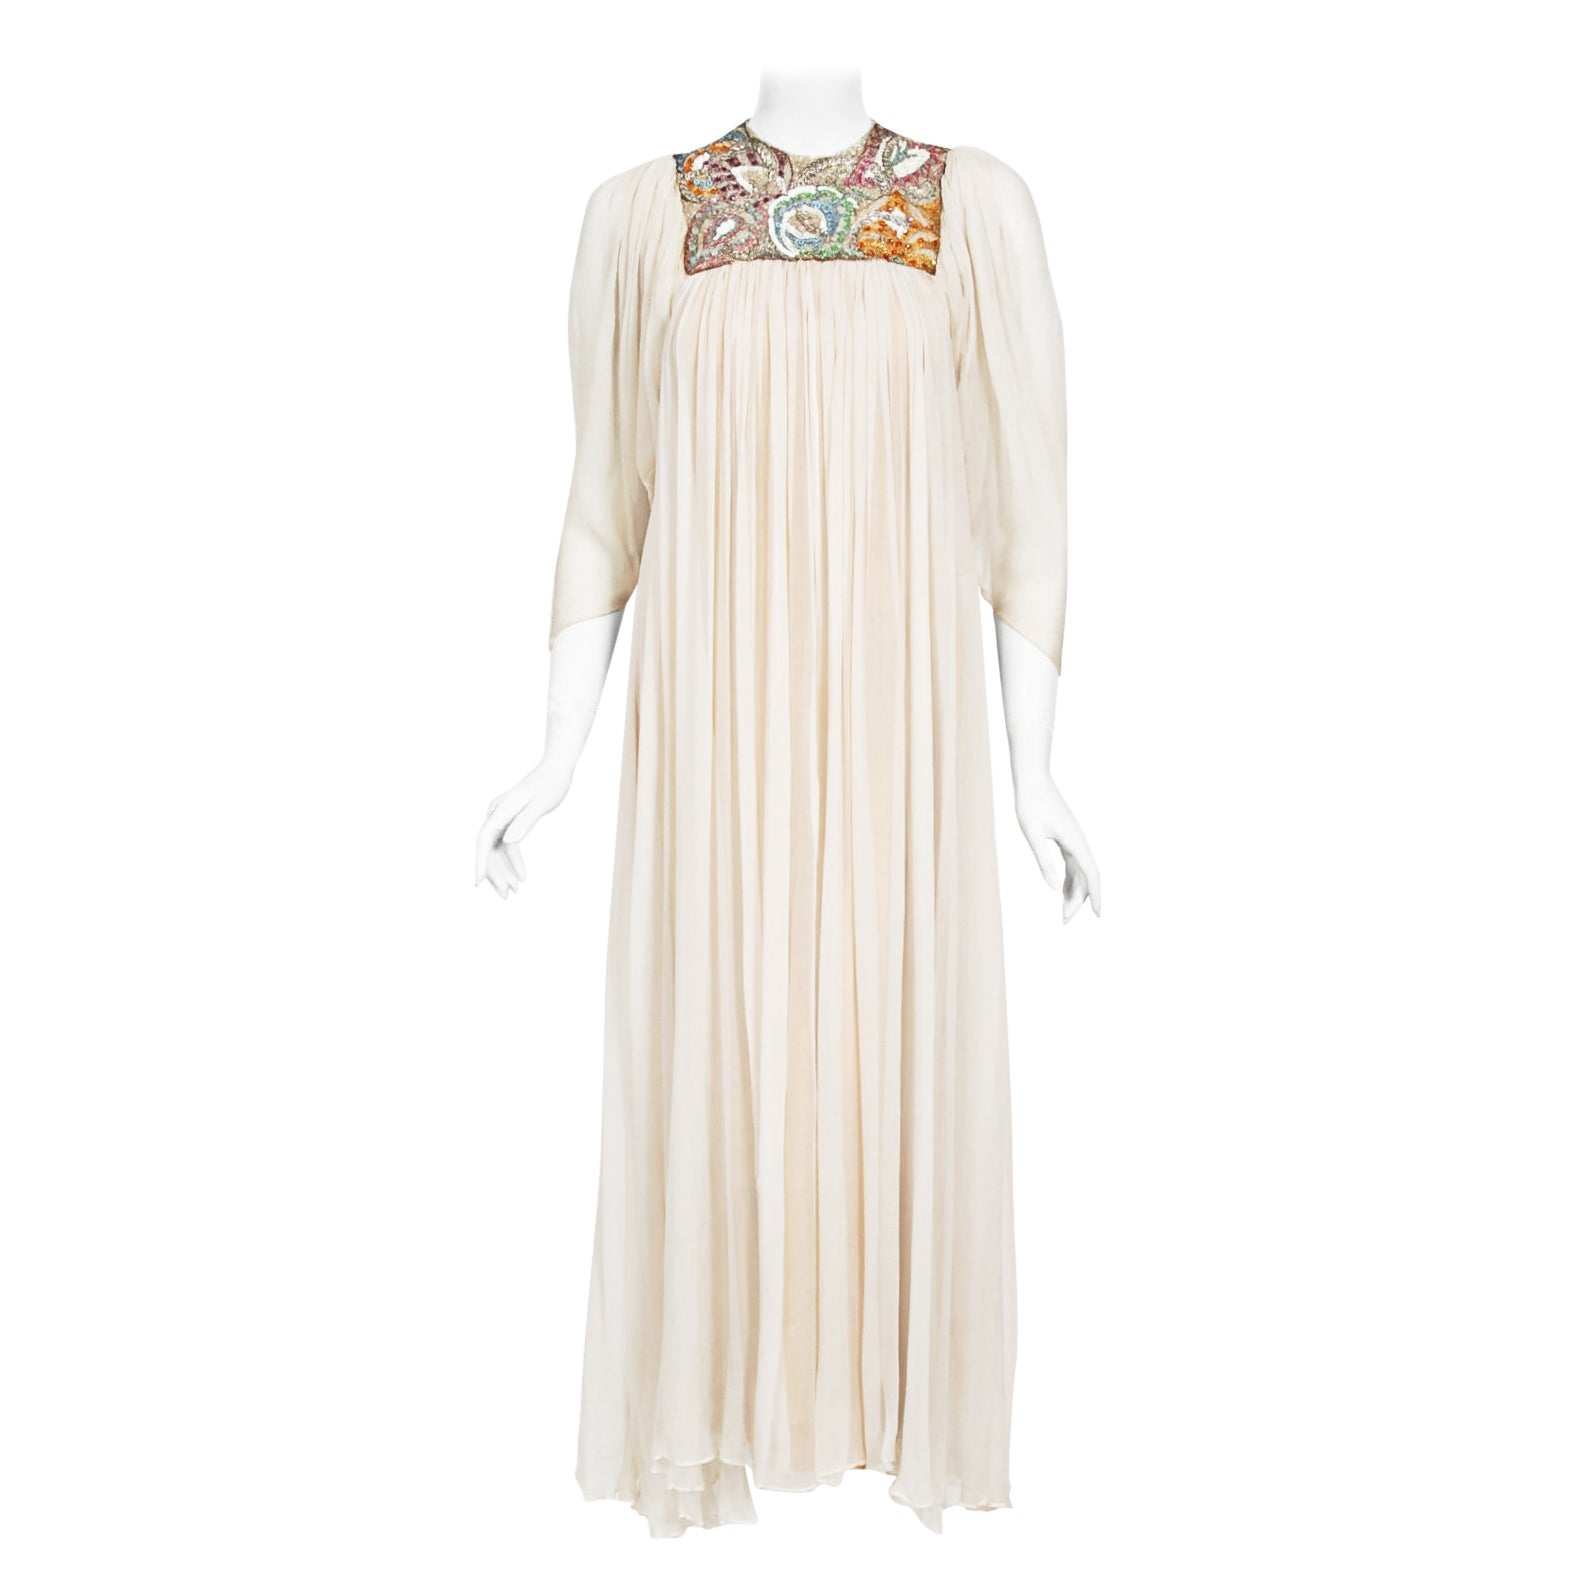 1970's Madame Grès Haute Couture Beaded Embroidered Ivory Sheer Silk Bridal Gown For Sale